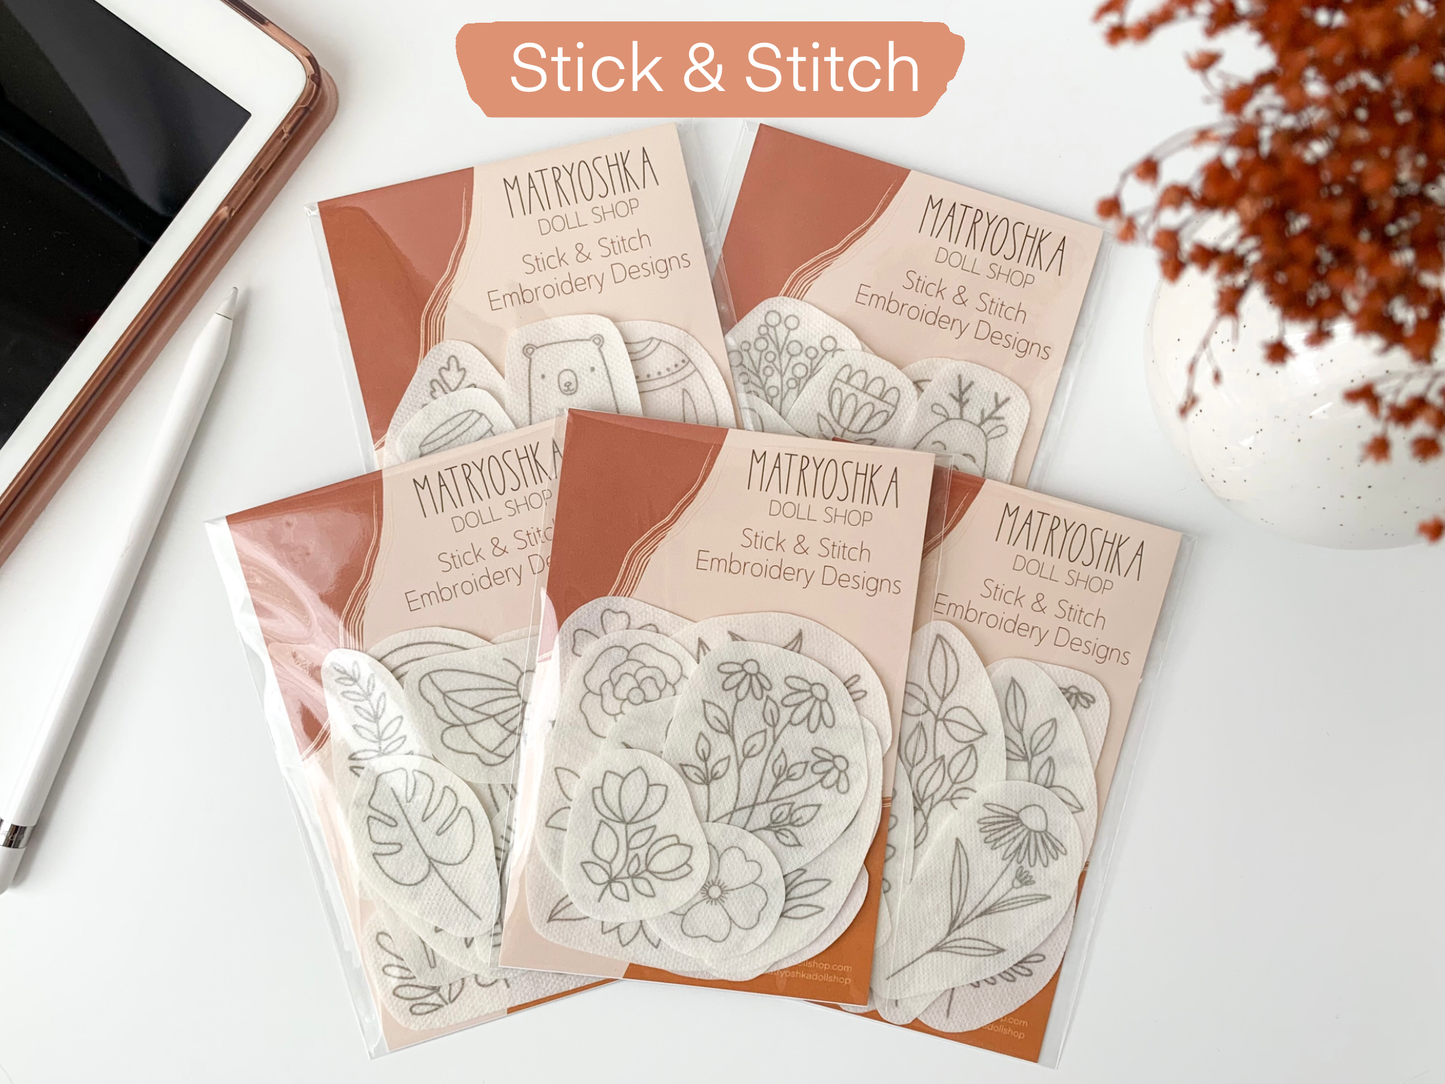 Stick & Stitch Embroidery designs, embroidery patterns